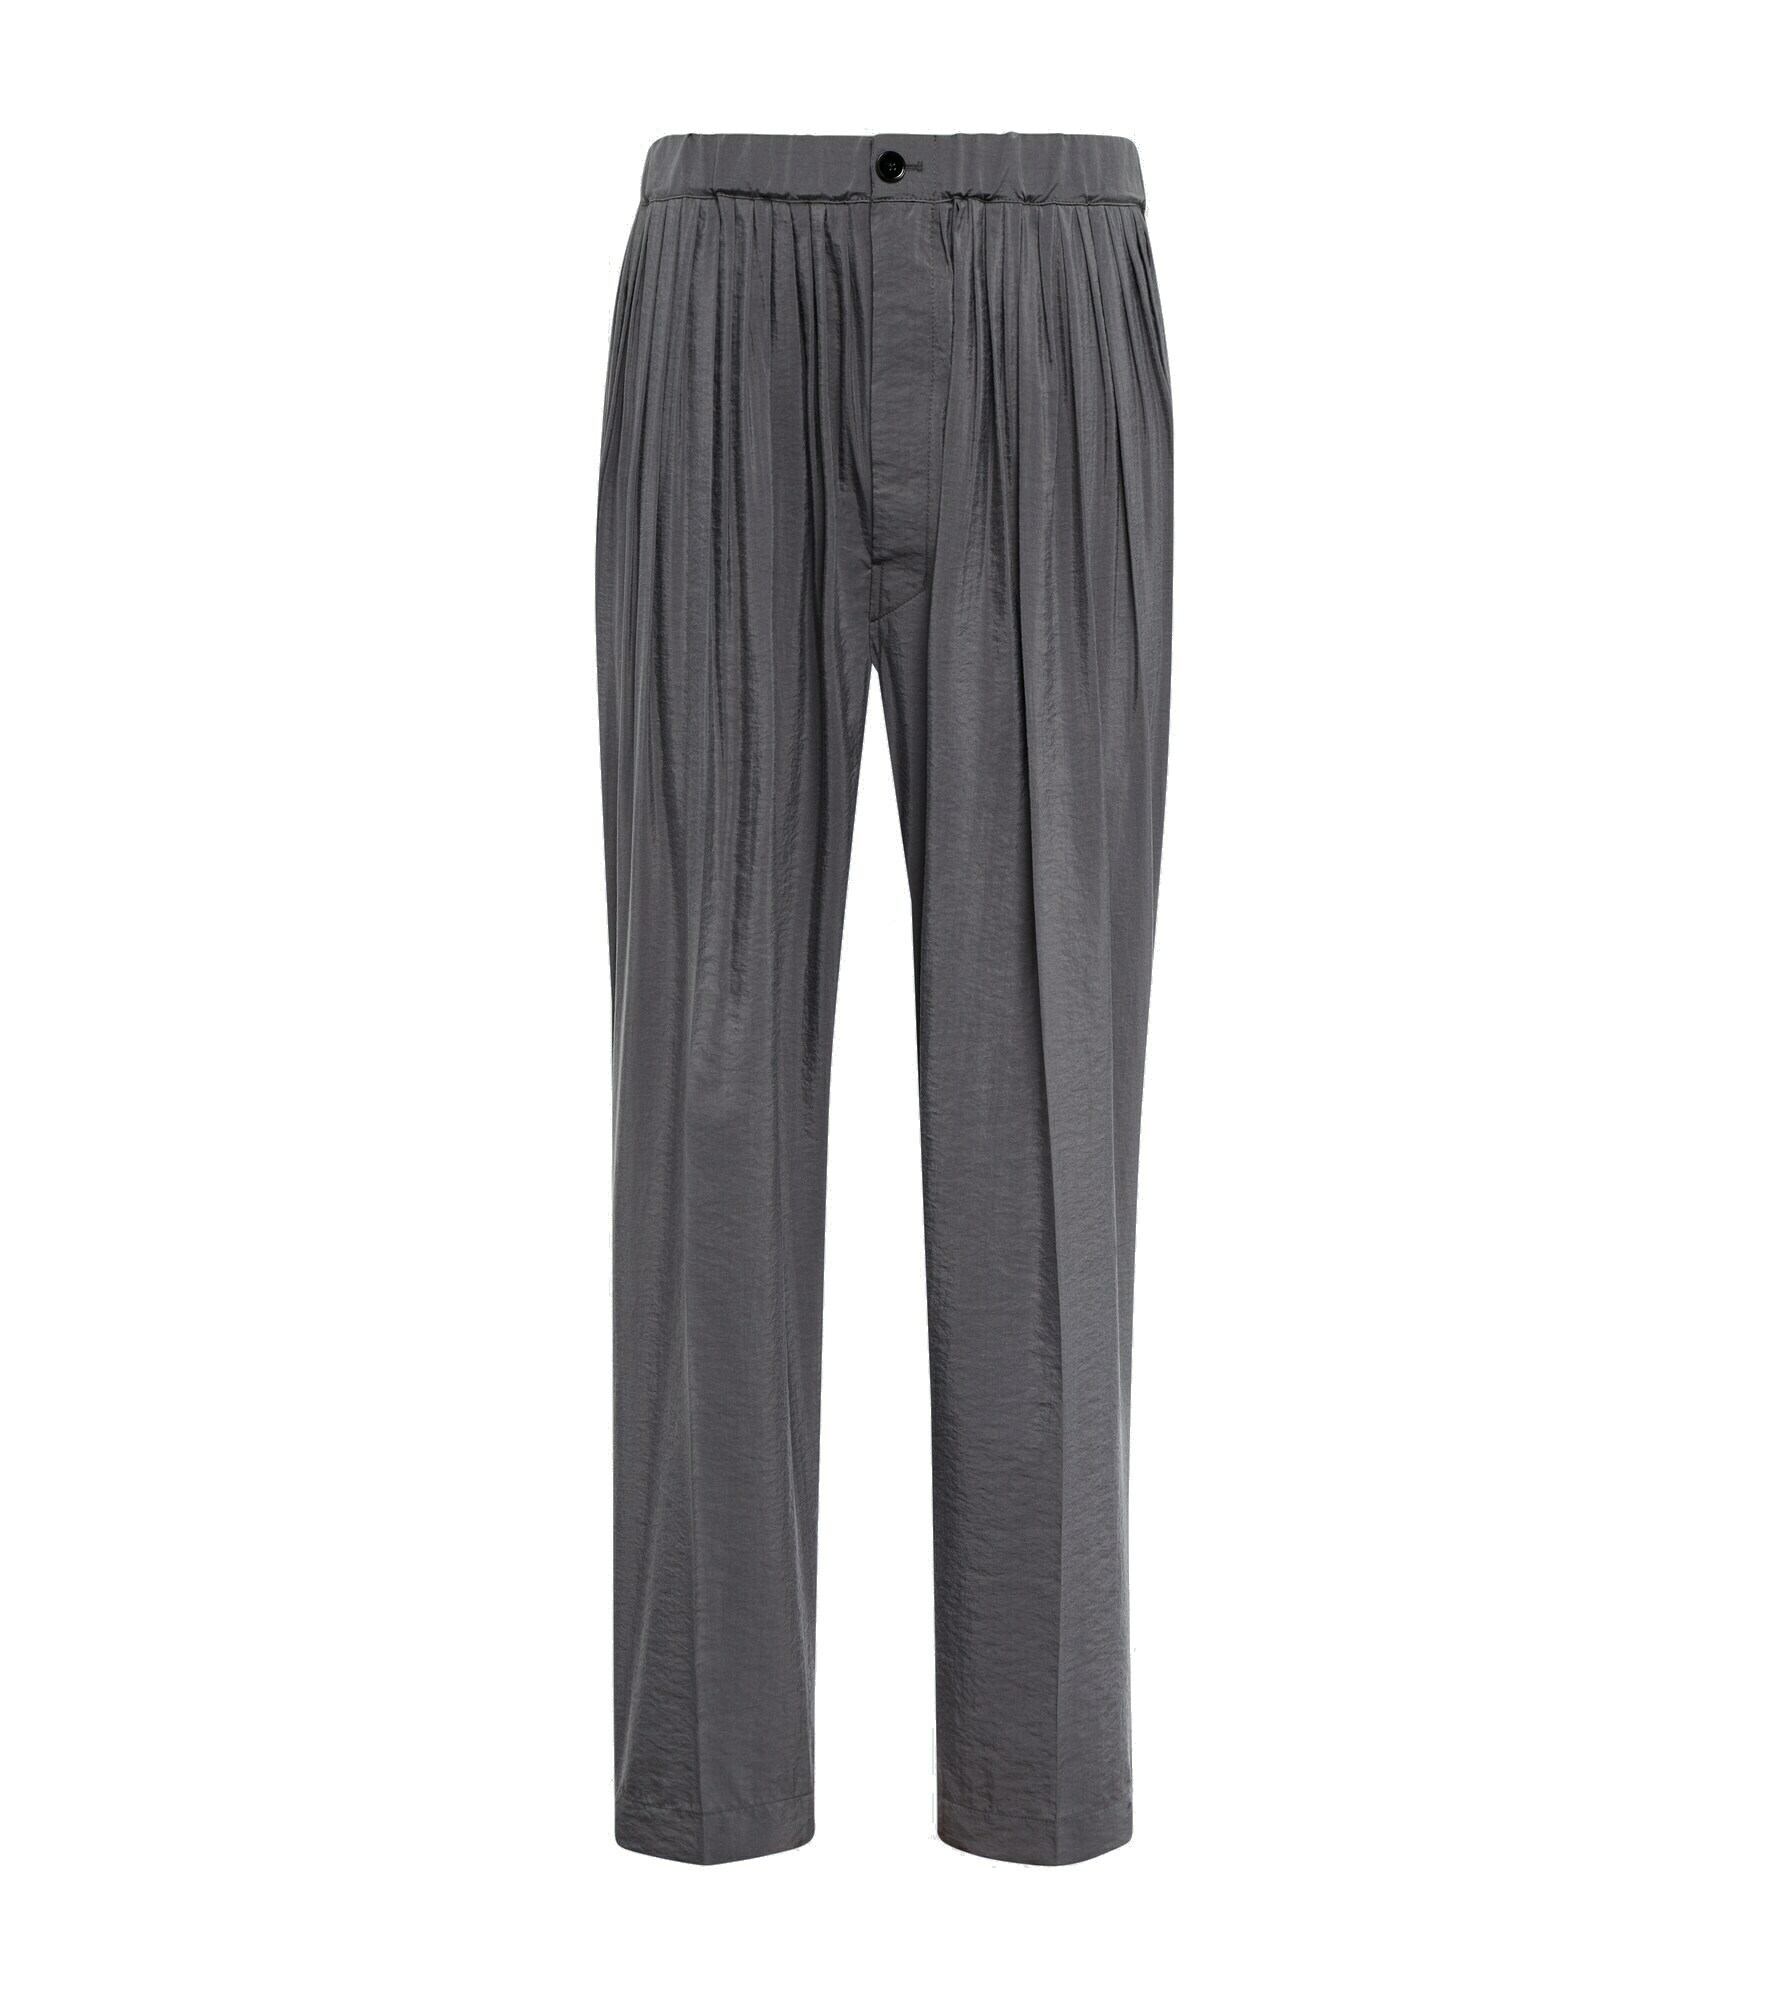 Lemaire - Tapered silk-blend pants Lemaire